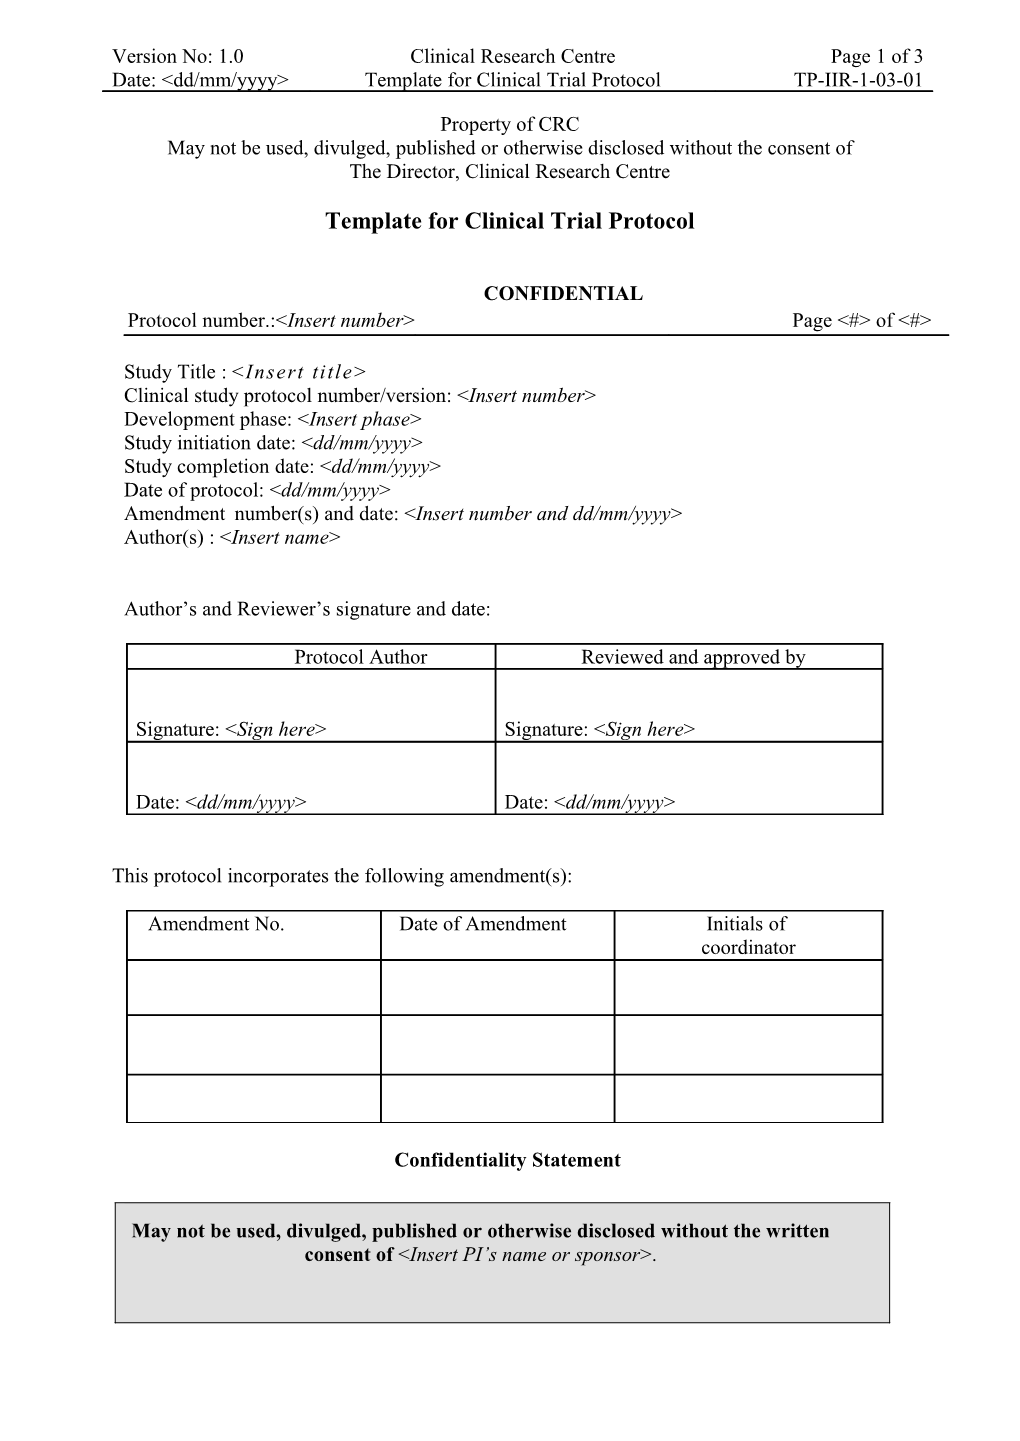 Template for Clinical Trial Protocol